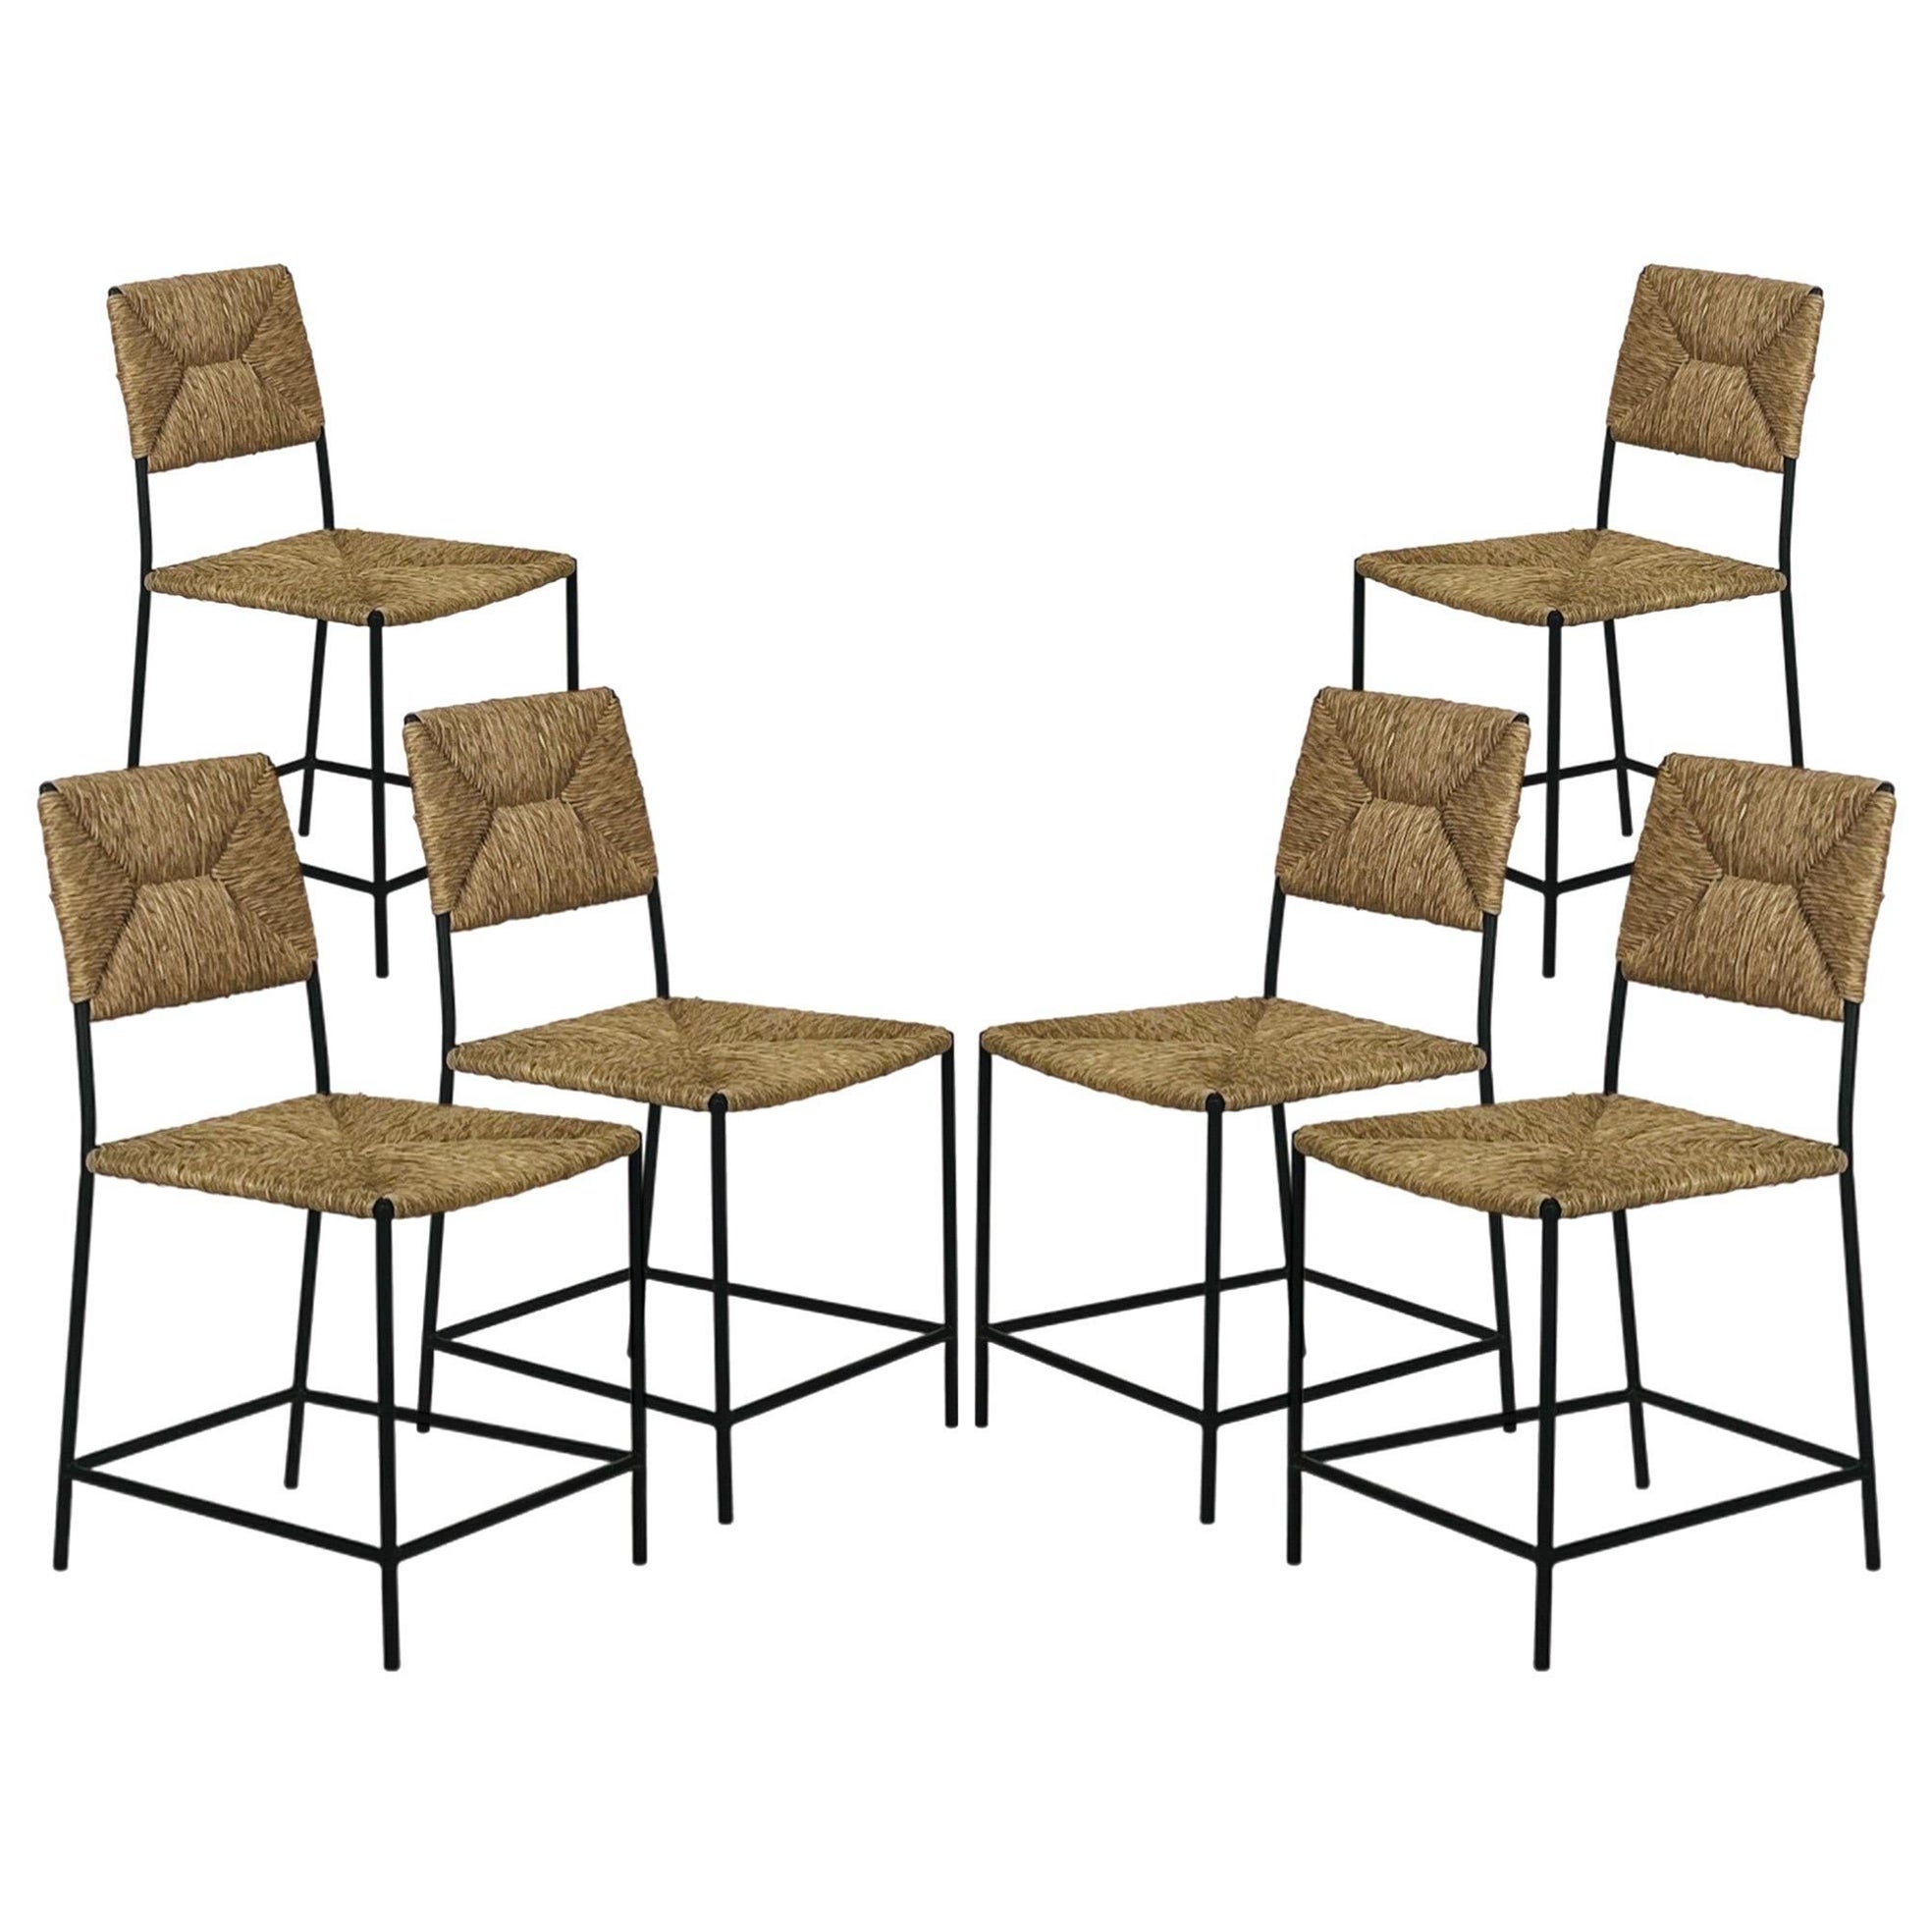 Set of 6 'Campagne' Dining Chairs by Design Frères